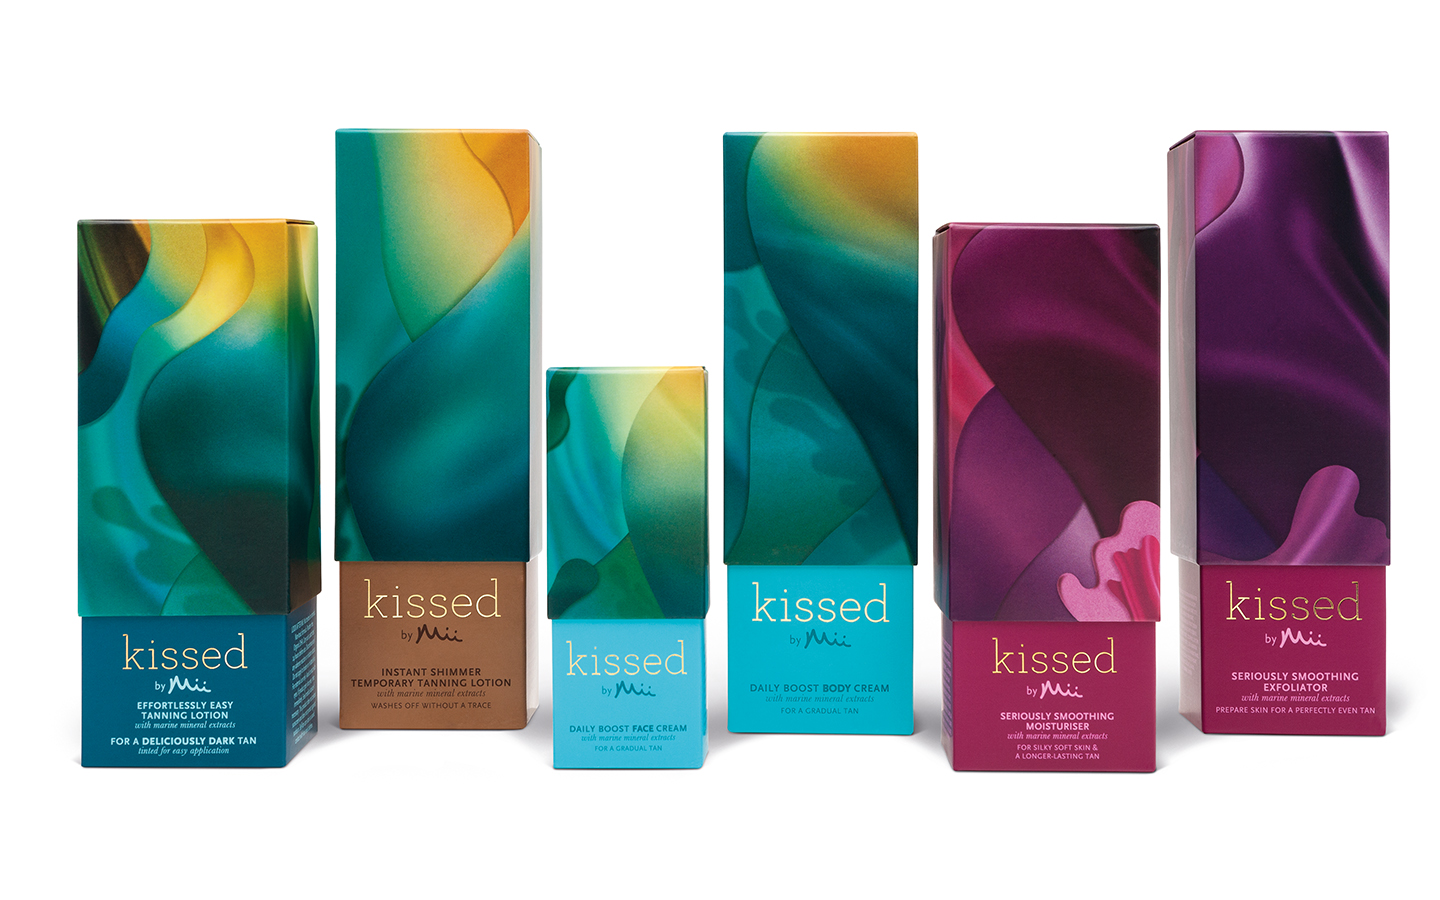 Photo: packaging for the tanning product range Kiss Mii